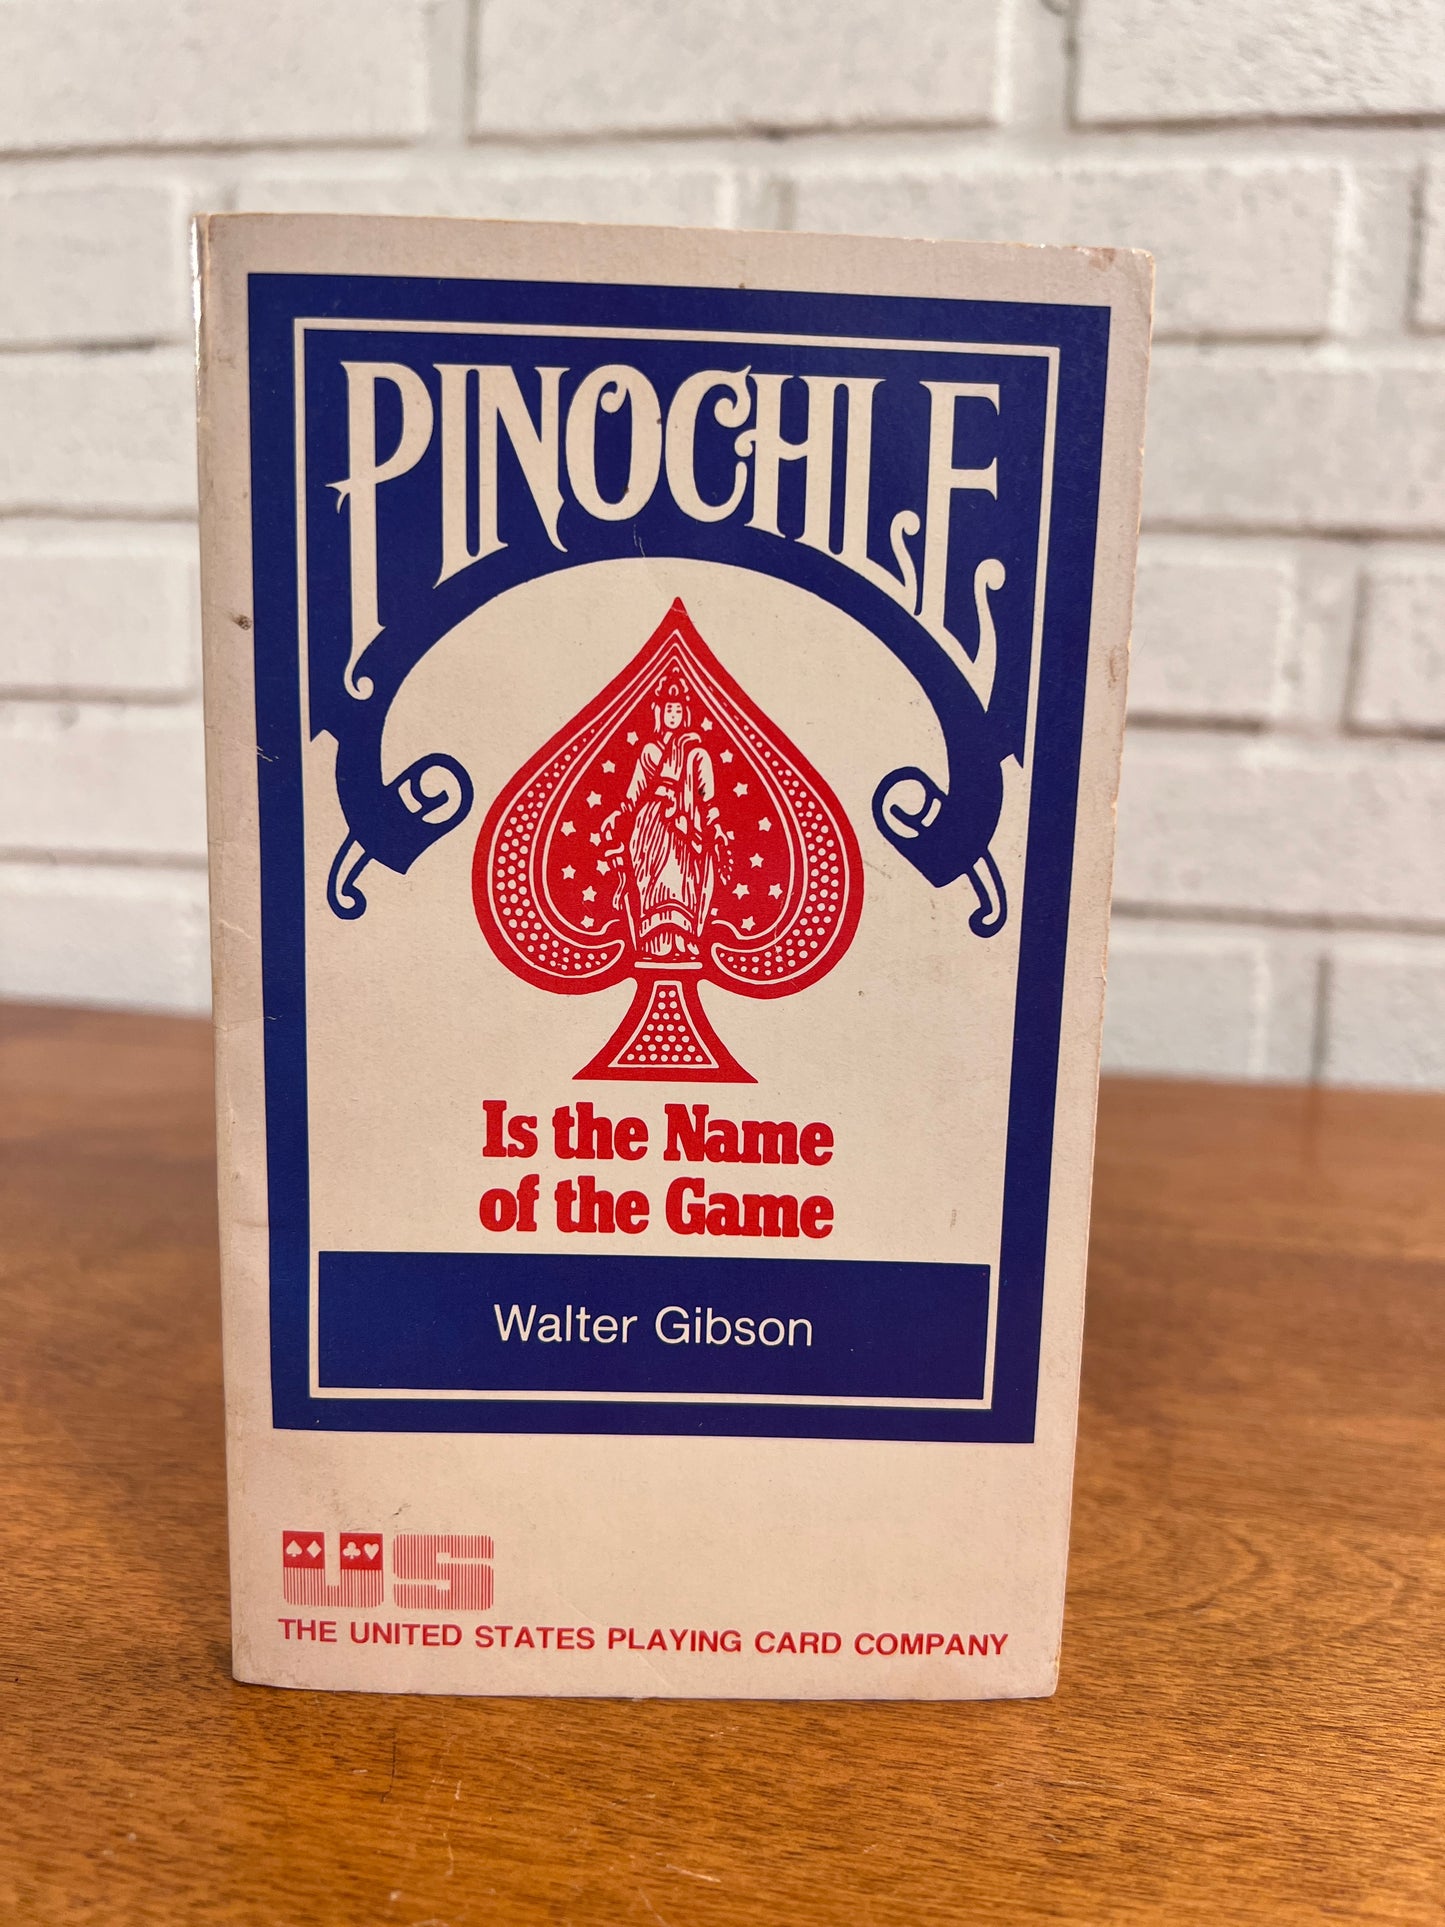 Pinochile: Is the Name of the Game by Walter Gibson [1974]